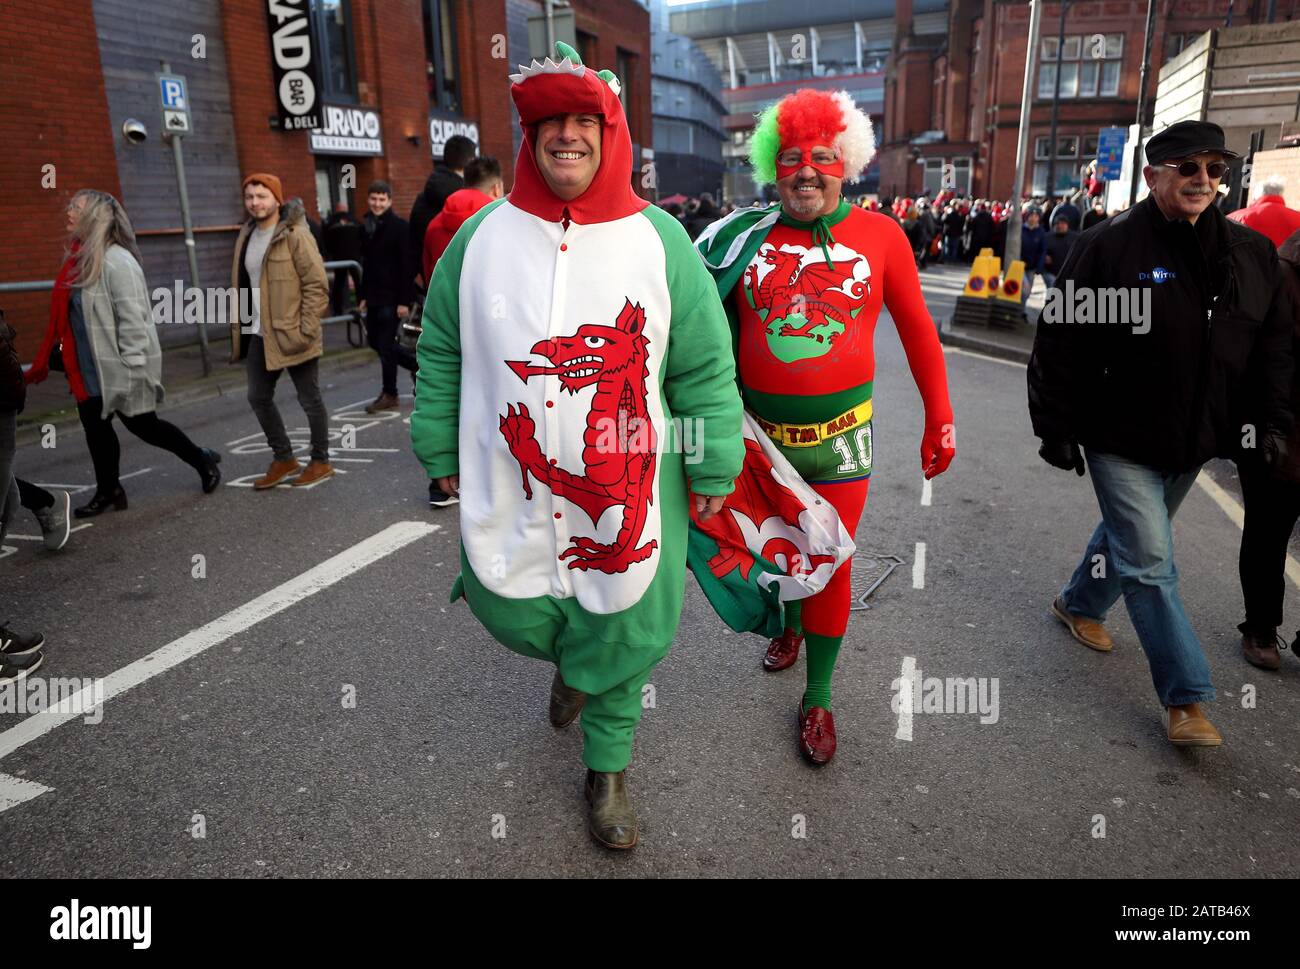 Wales fans in fancy dress arrive for the Guinness Six Nations match at the Principality Stadium, Cardiff. Stock Photo